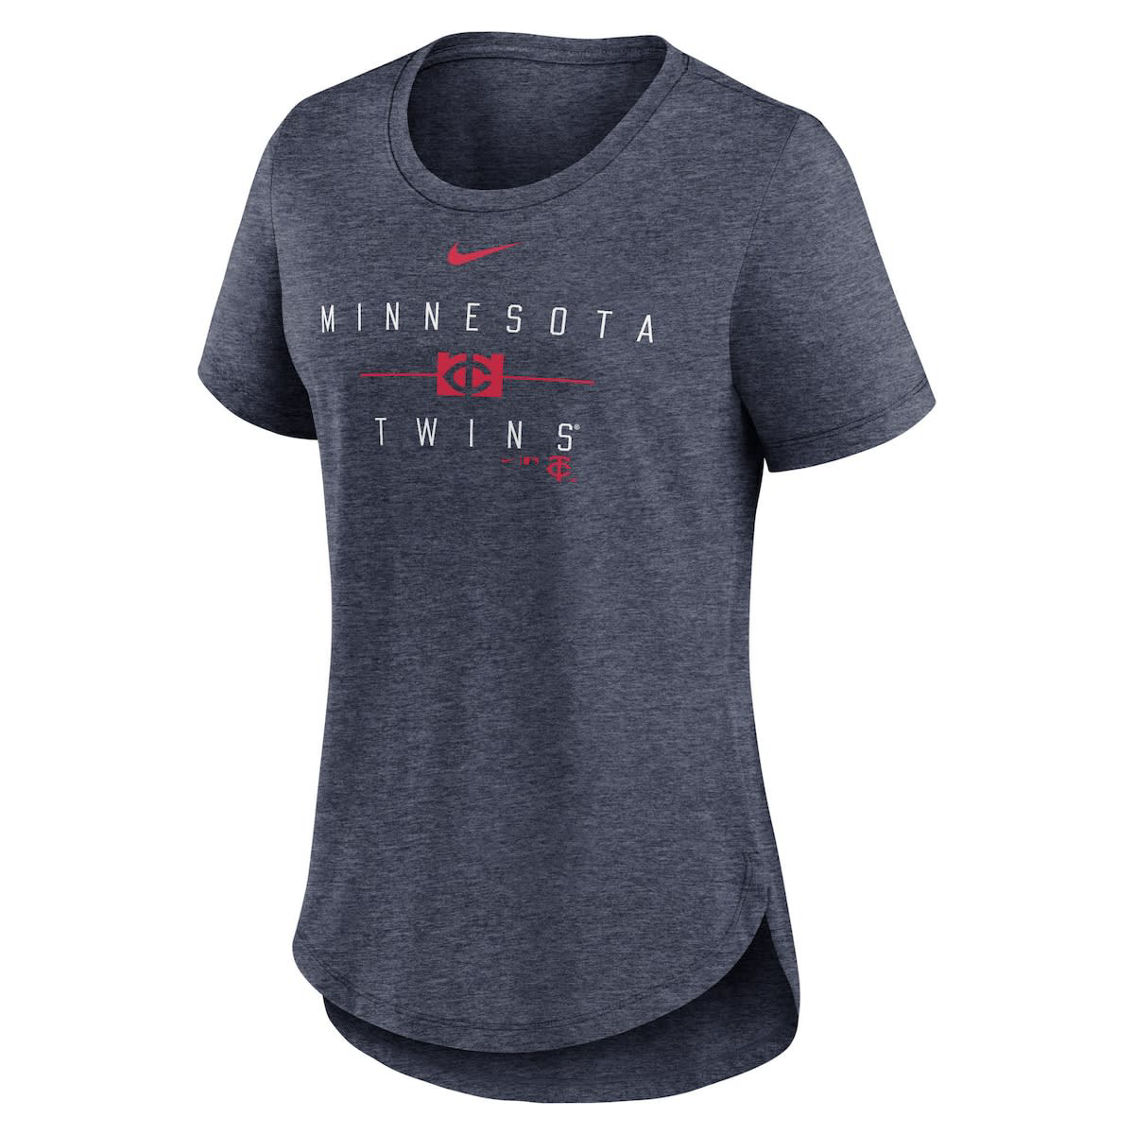 Nike Women's Heather Navy Minnesota Twins Knockout Team Stack Tri-Blend T-Shirt - Image 3 of 4